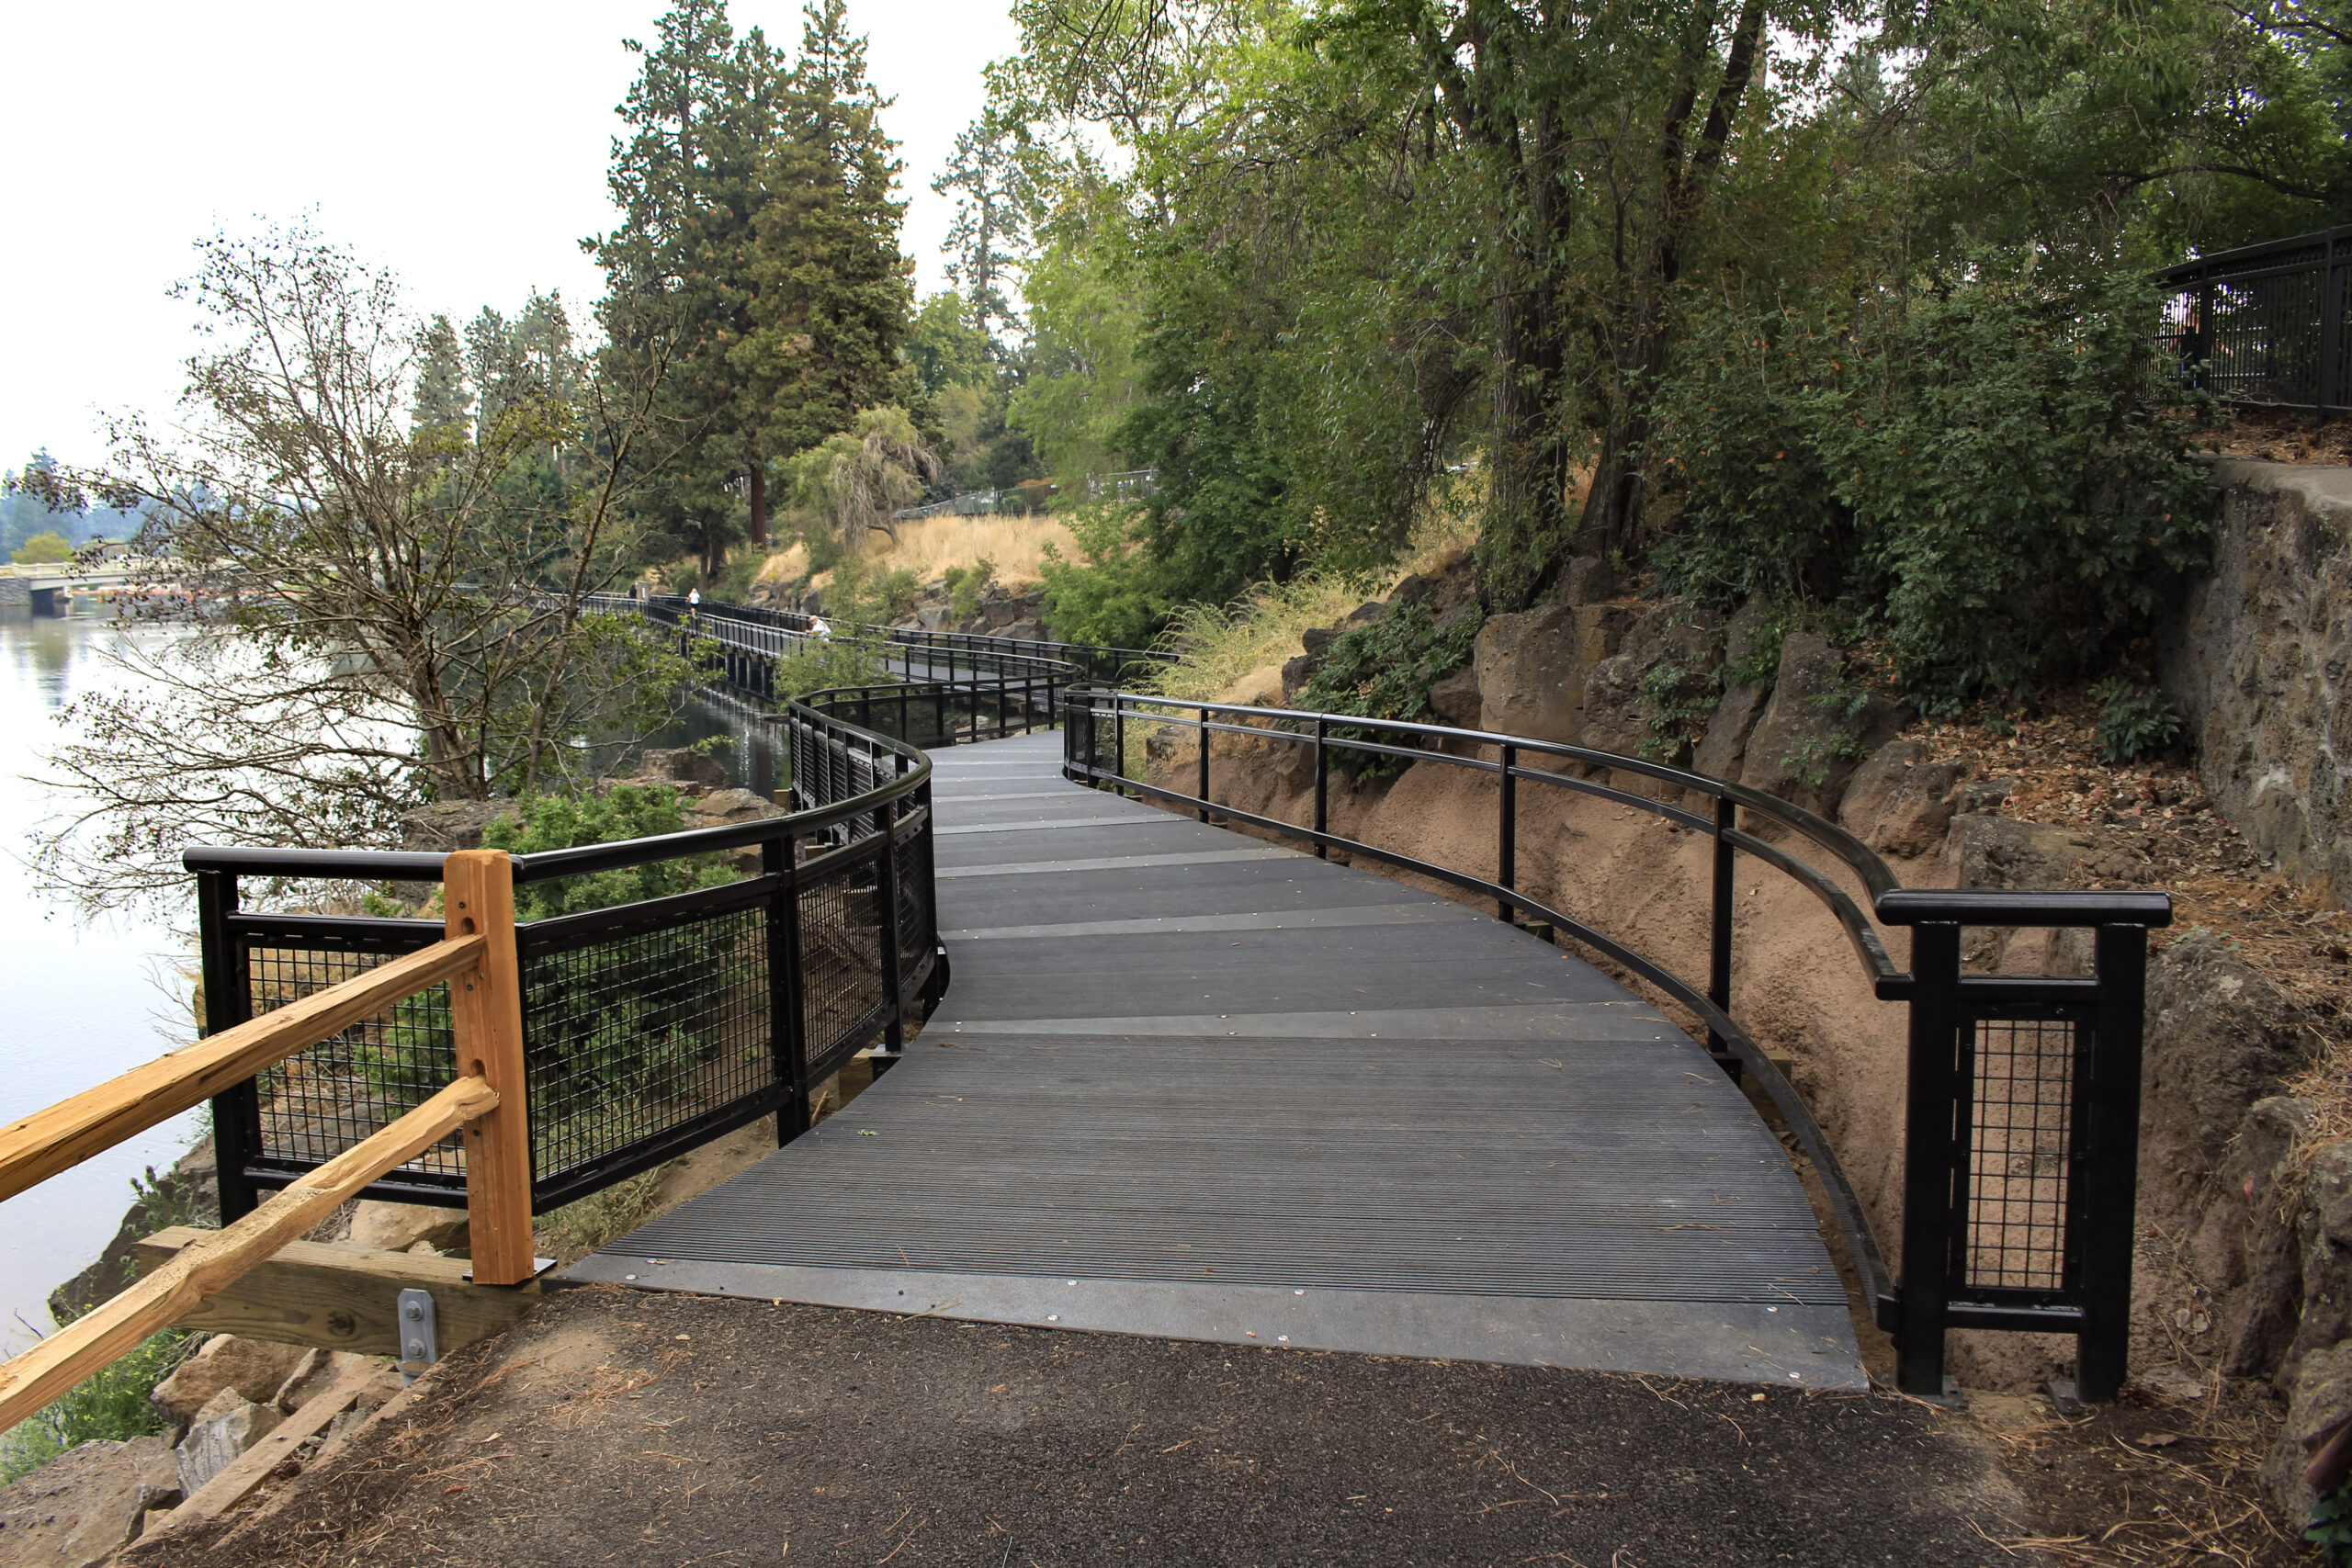 The new boardwalk in the Pioneer Reach of the DRT